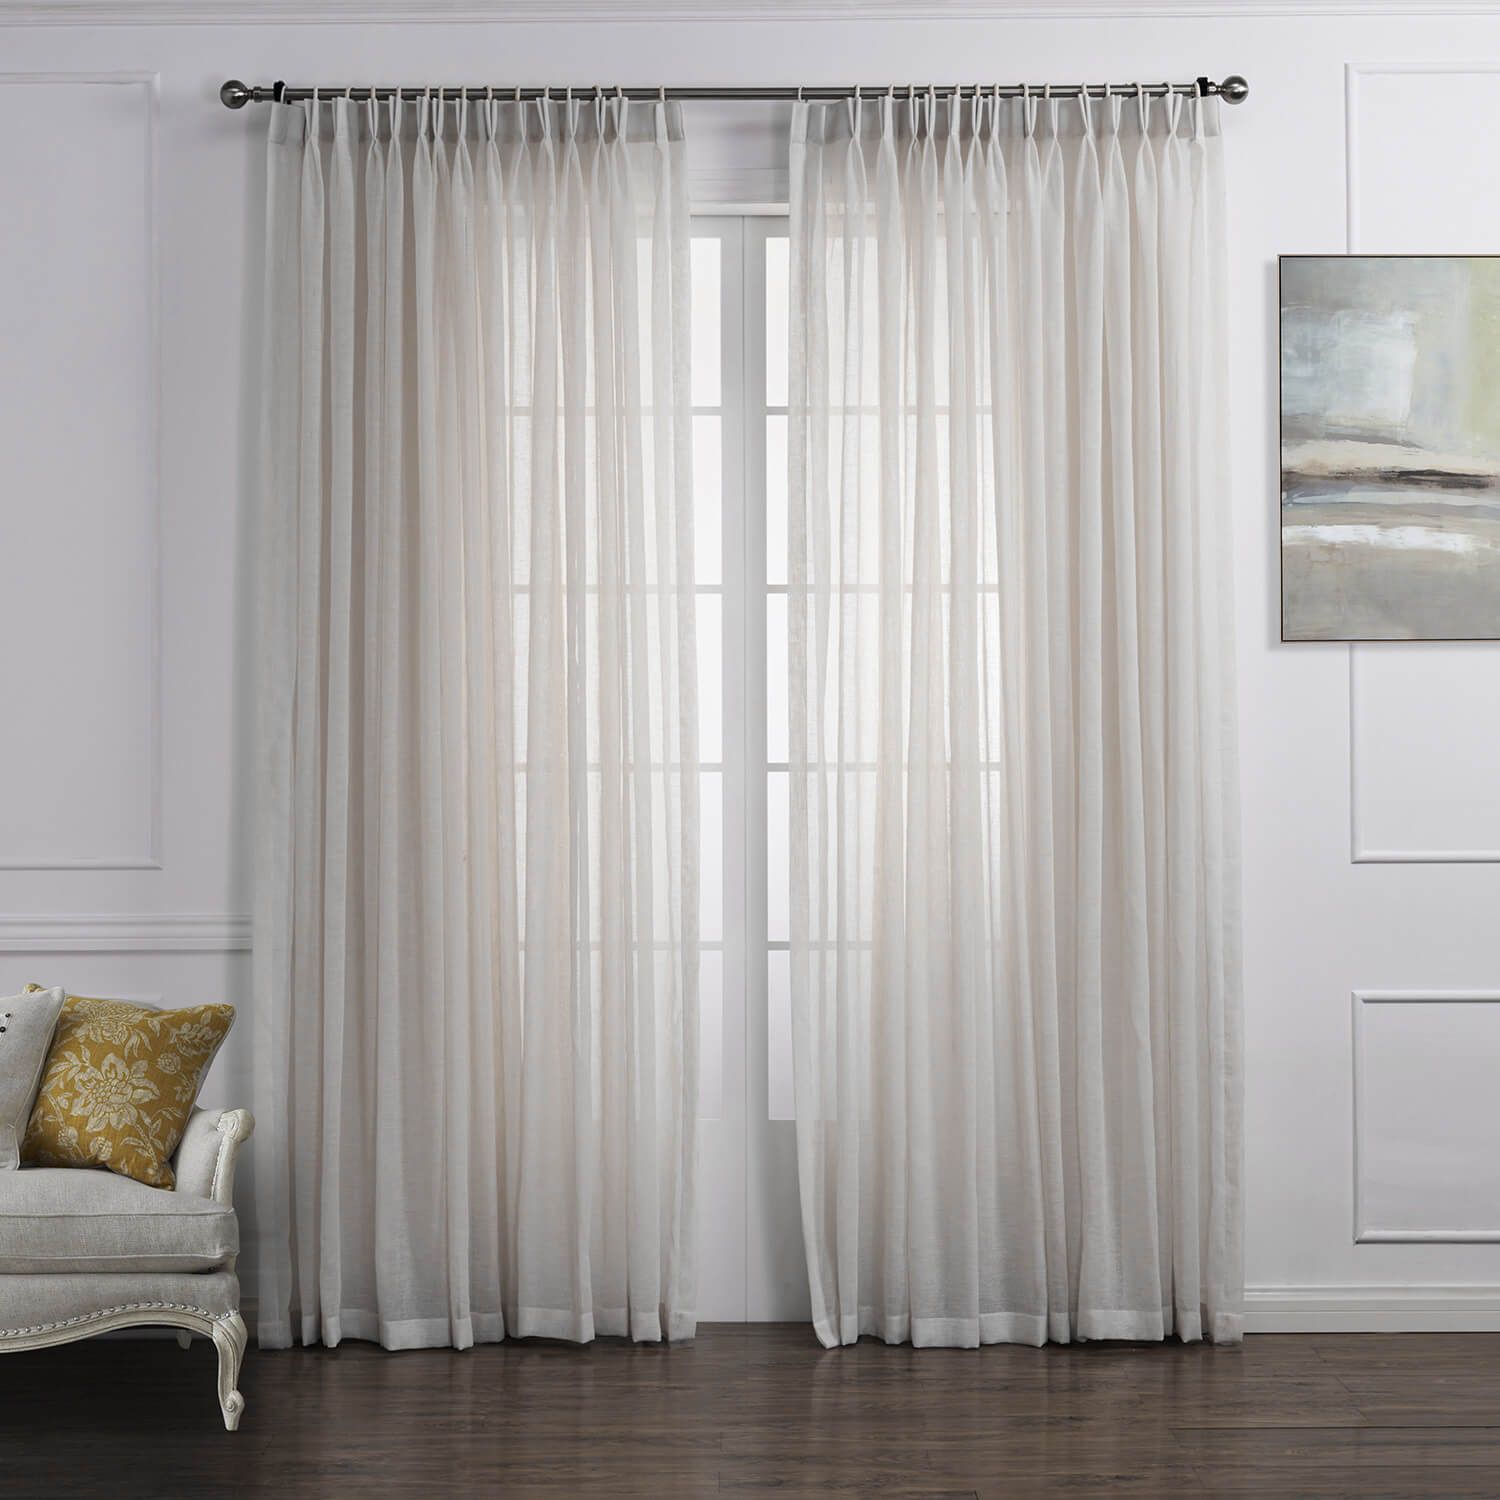 Chic Pleated Curtains for Textured Home Décor